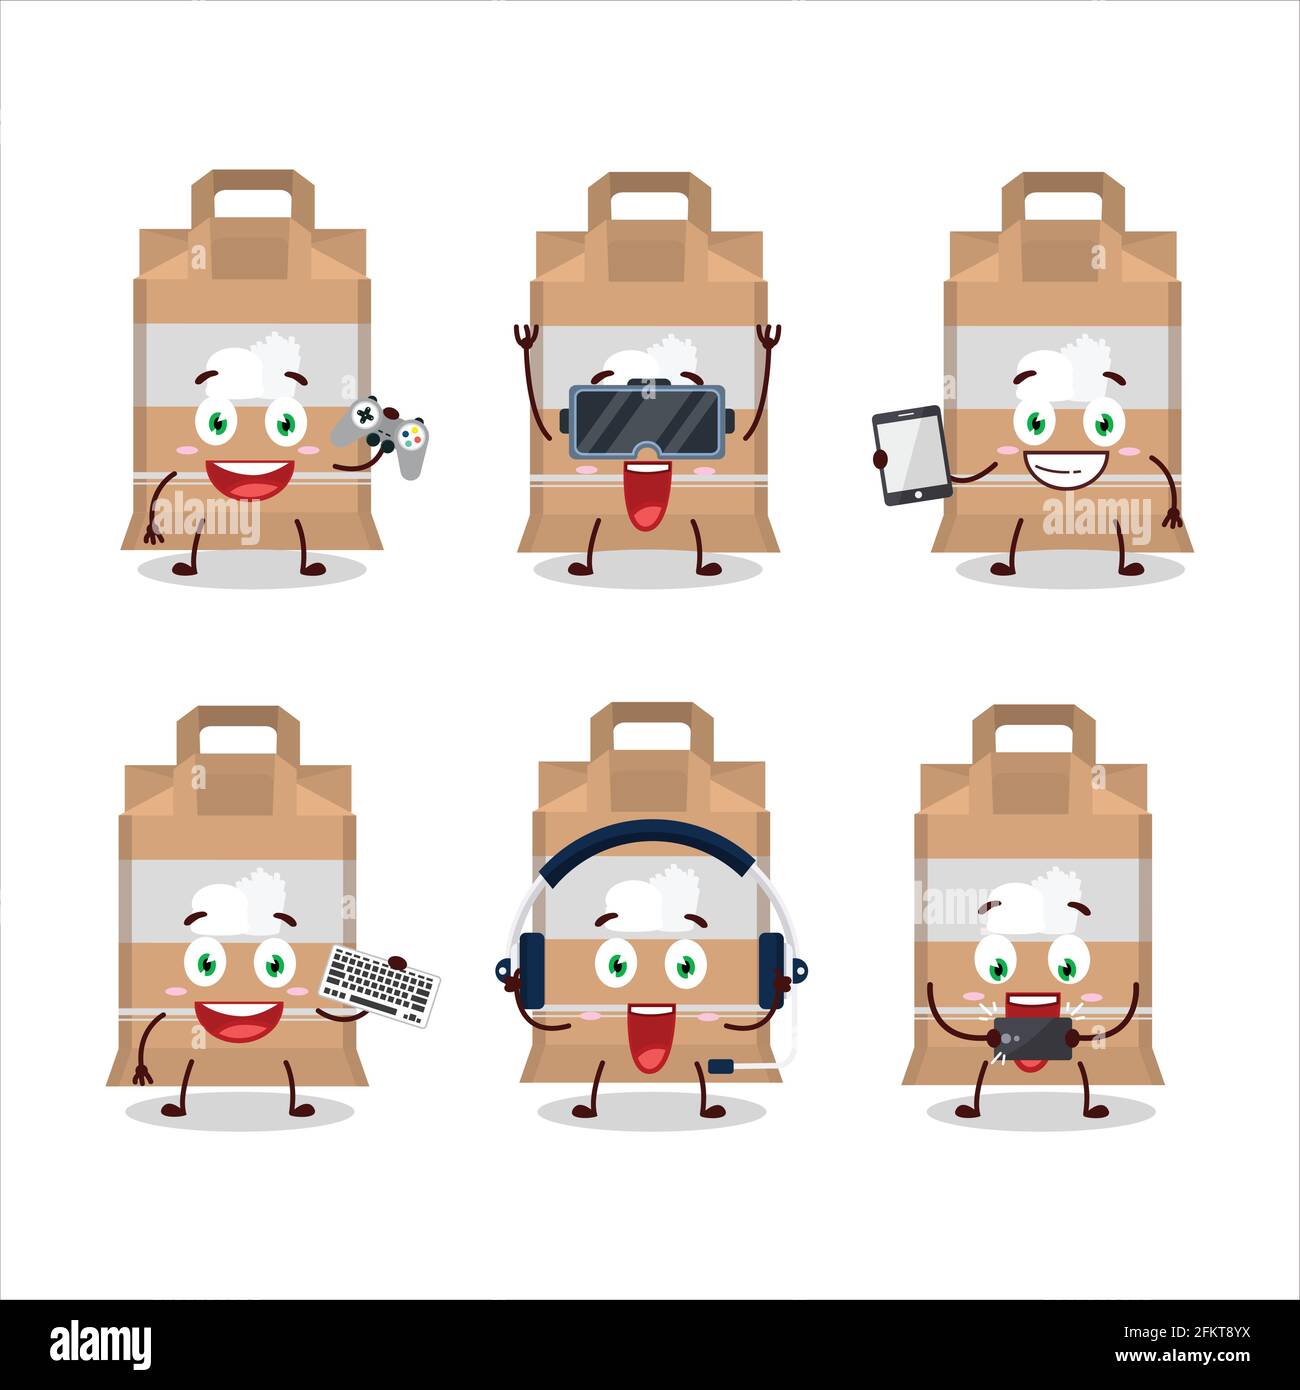 Fast food bag cartoon character are playing games with various cute emoticons. Vector illustration Stock Vector